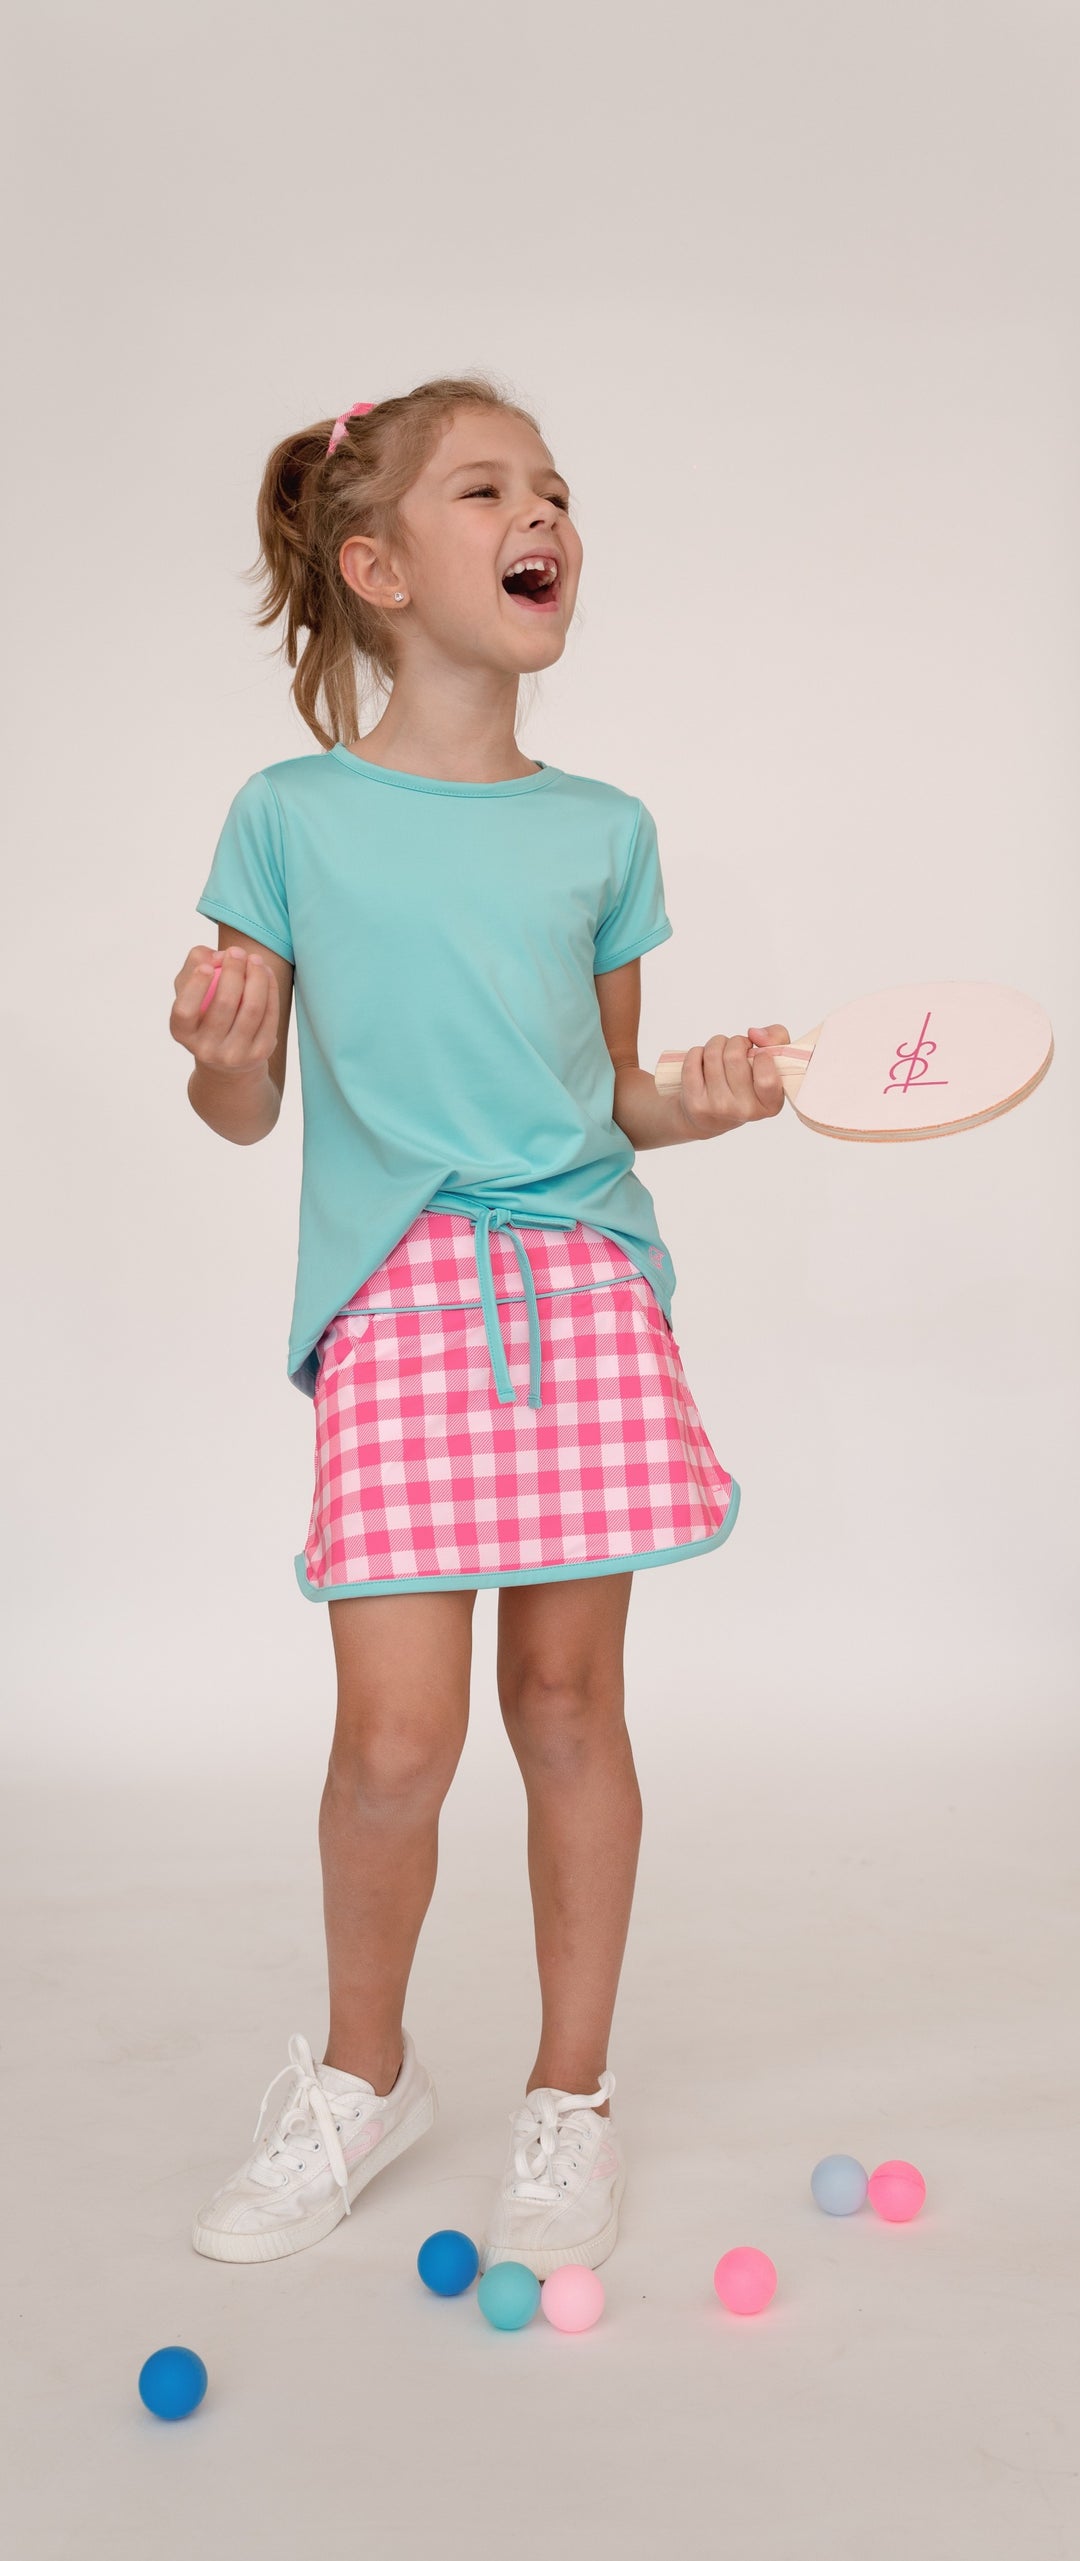 Tiffany Skort - Power Pink Buffalo Check, Totally Turquoise